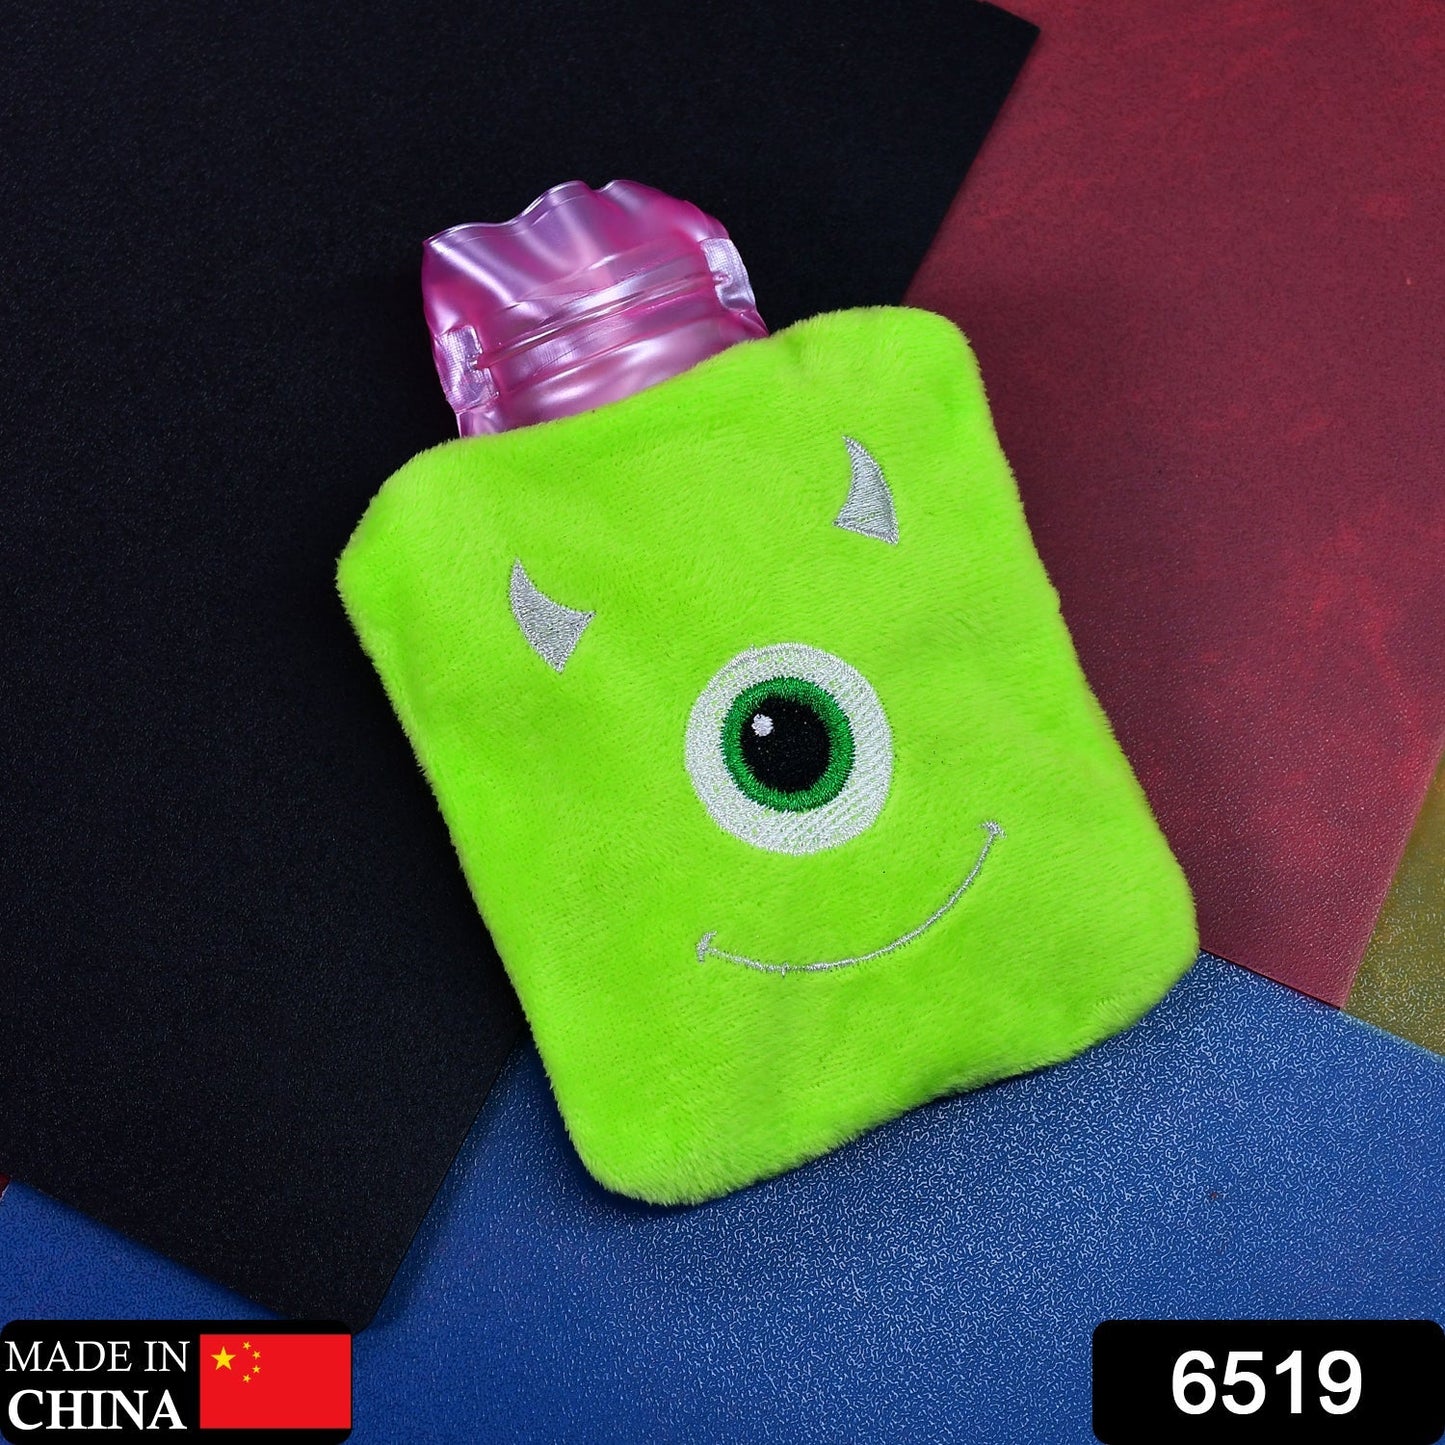 6519 Green one eye monster print small Hot Water Bag with Cover for Pain Relief, Neck, Shoulder Pain and Hand, Feet Warmer, Menstrual Cramps. DeoDap